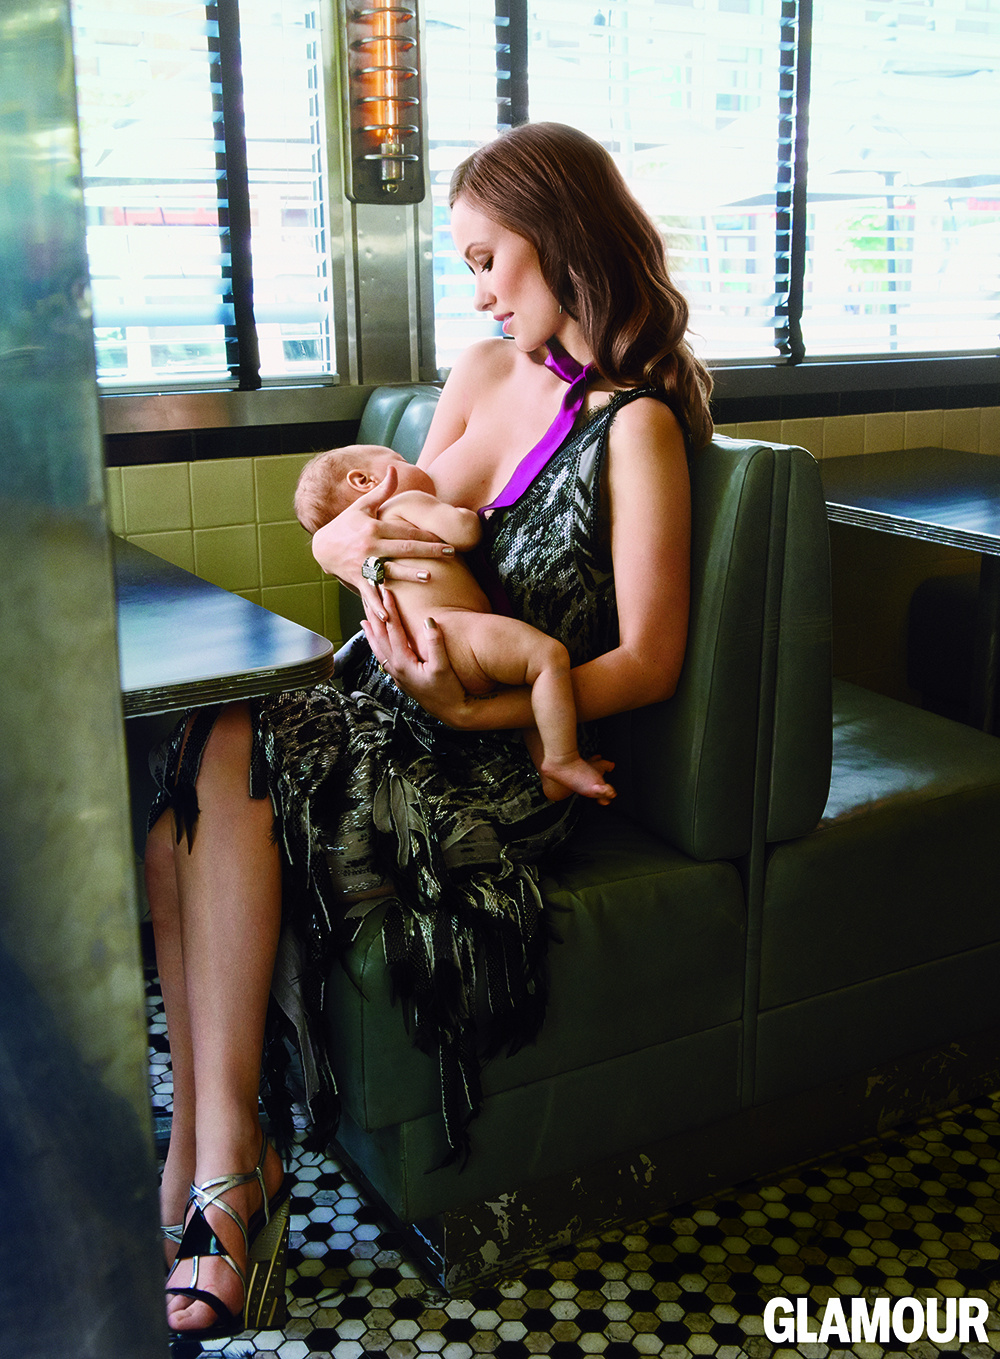 Olivia Wilde breastfeeds her son, Otis, in a new issue of Glamour